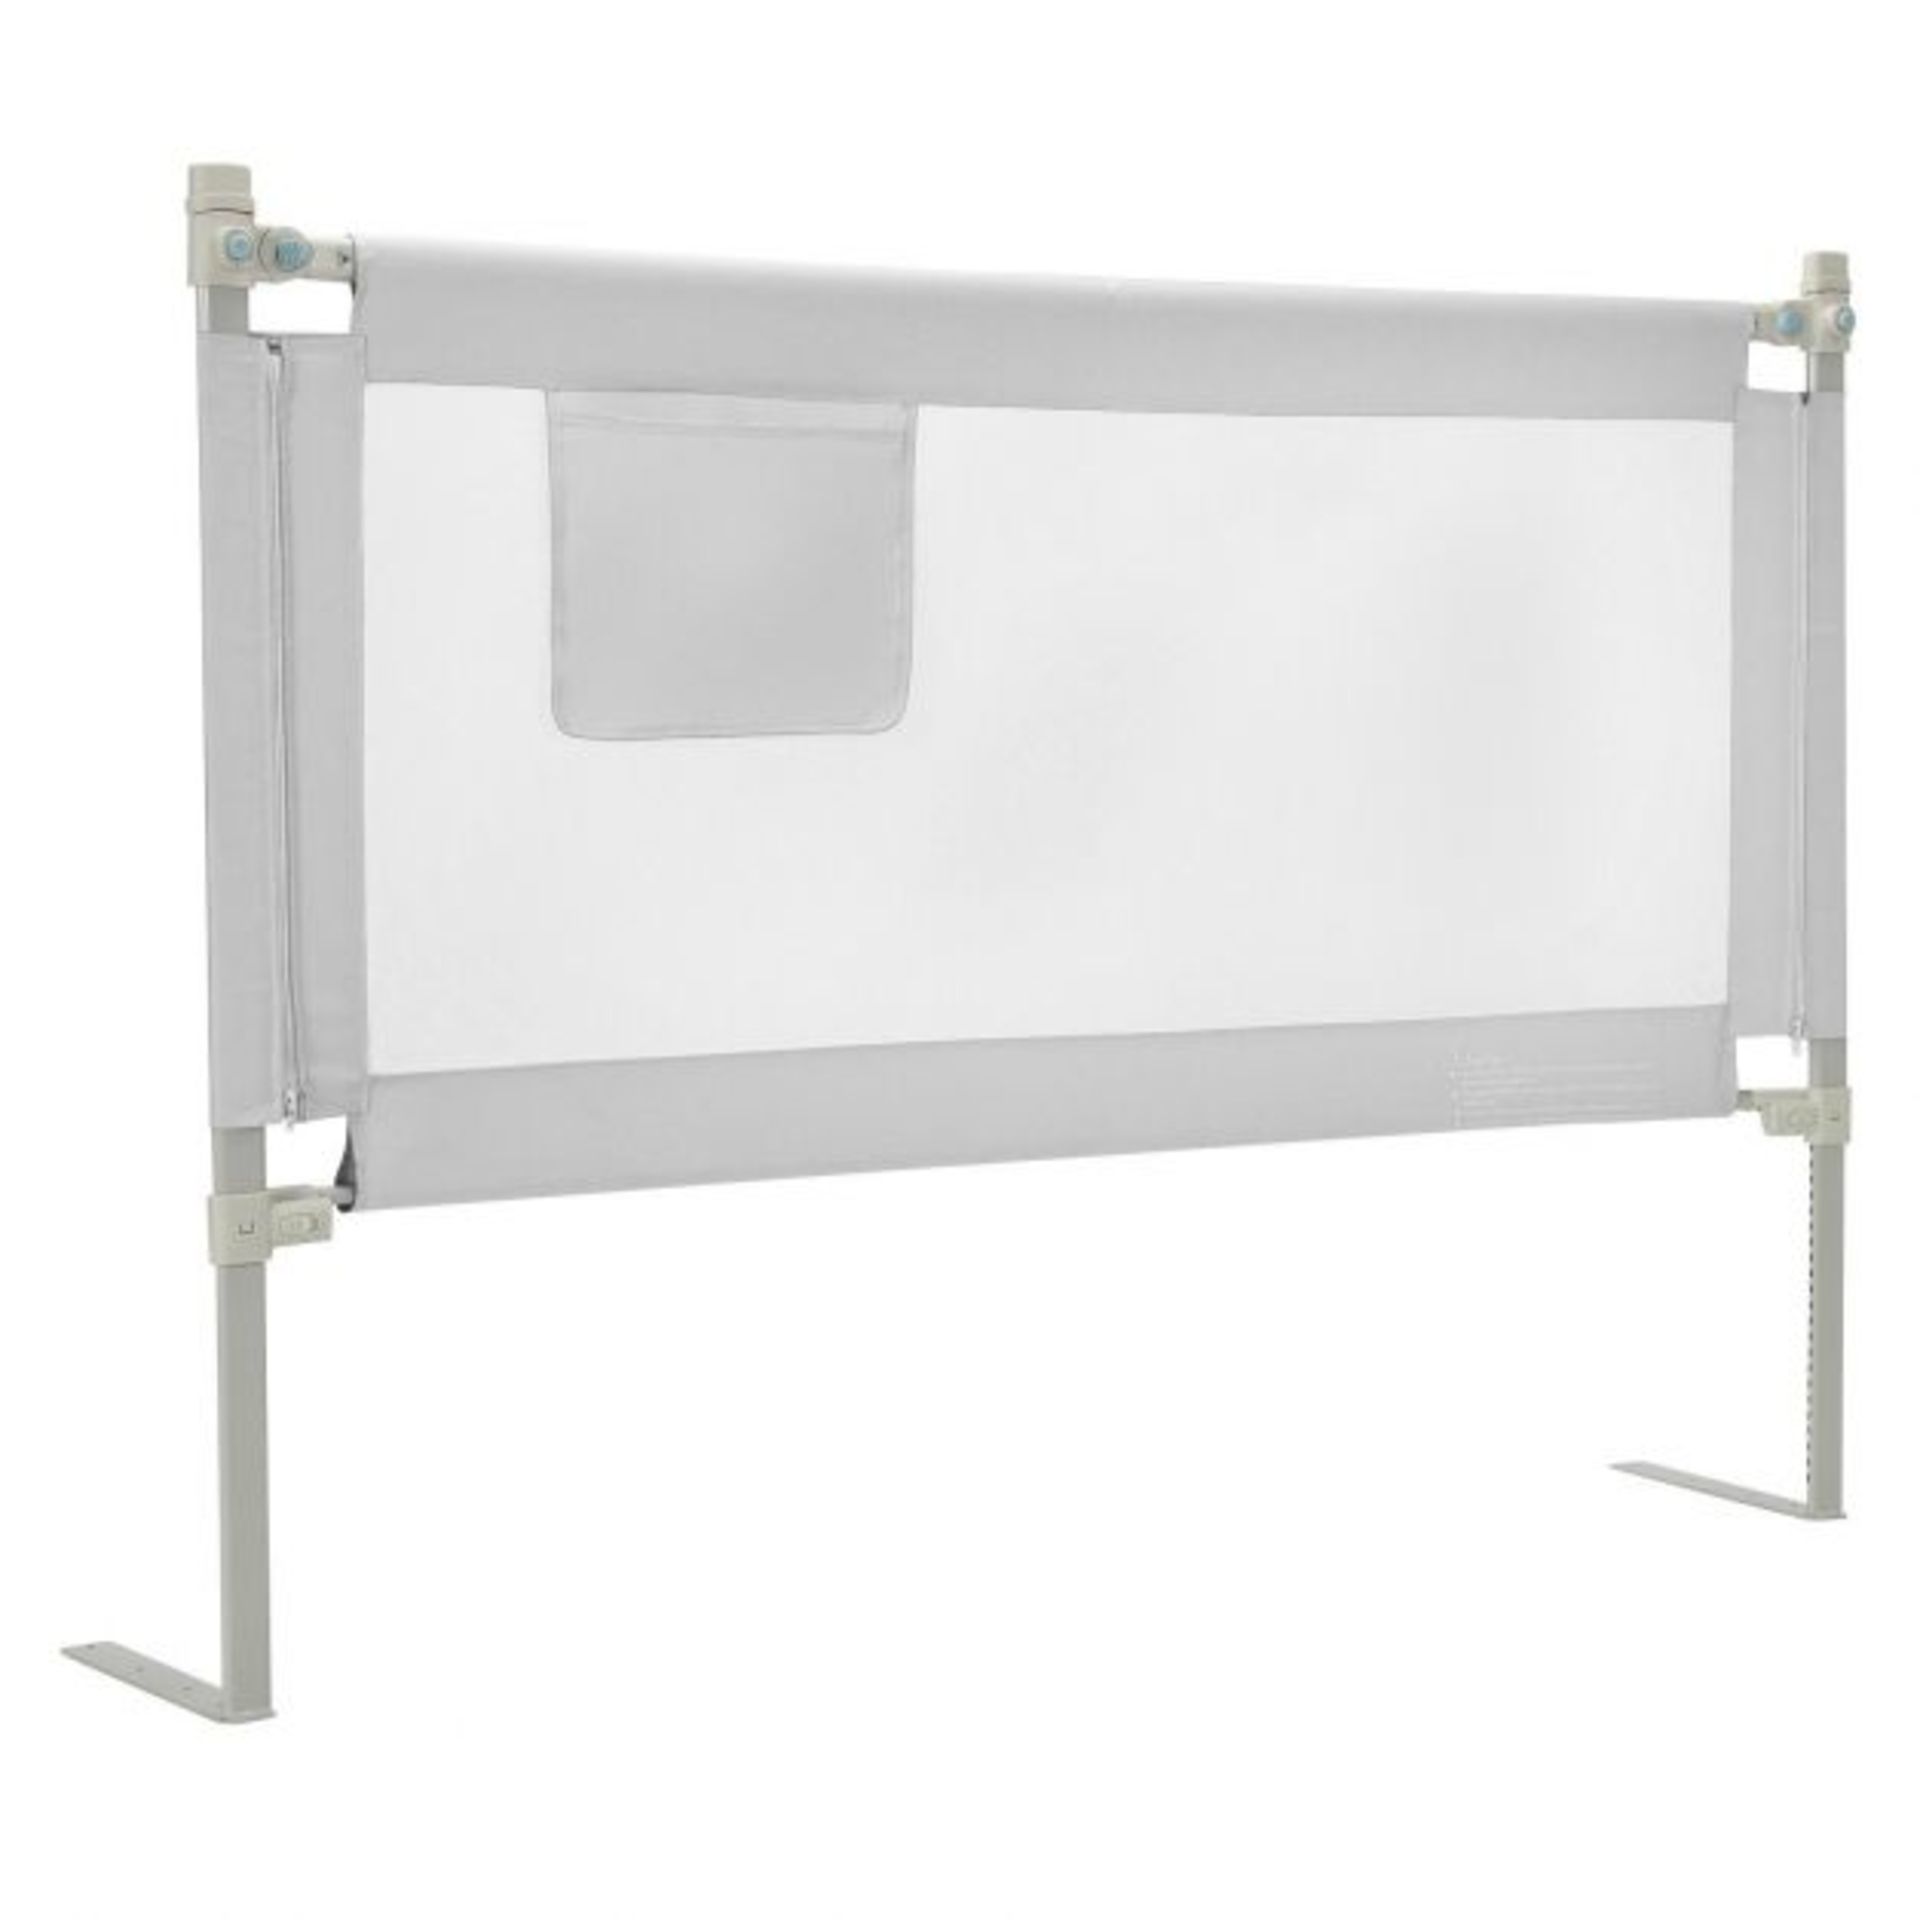 145cm Height Adjustable Bed Rail with Storage Pocket and Safety Lock - ER54